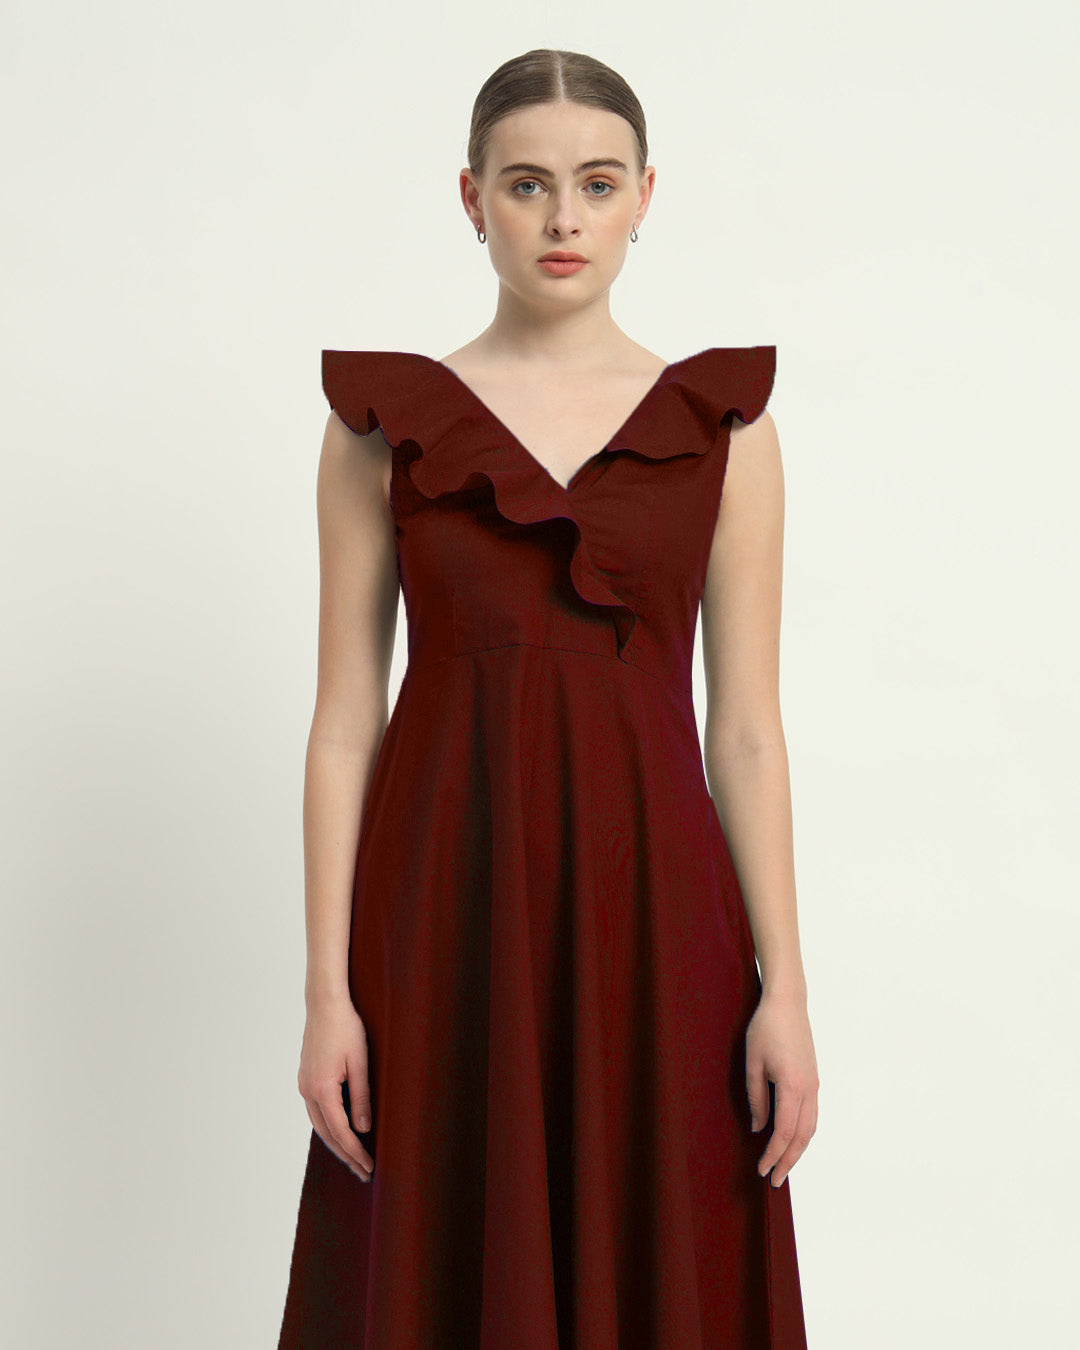 The Albany Rouge Cotton Dress